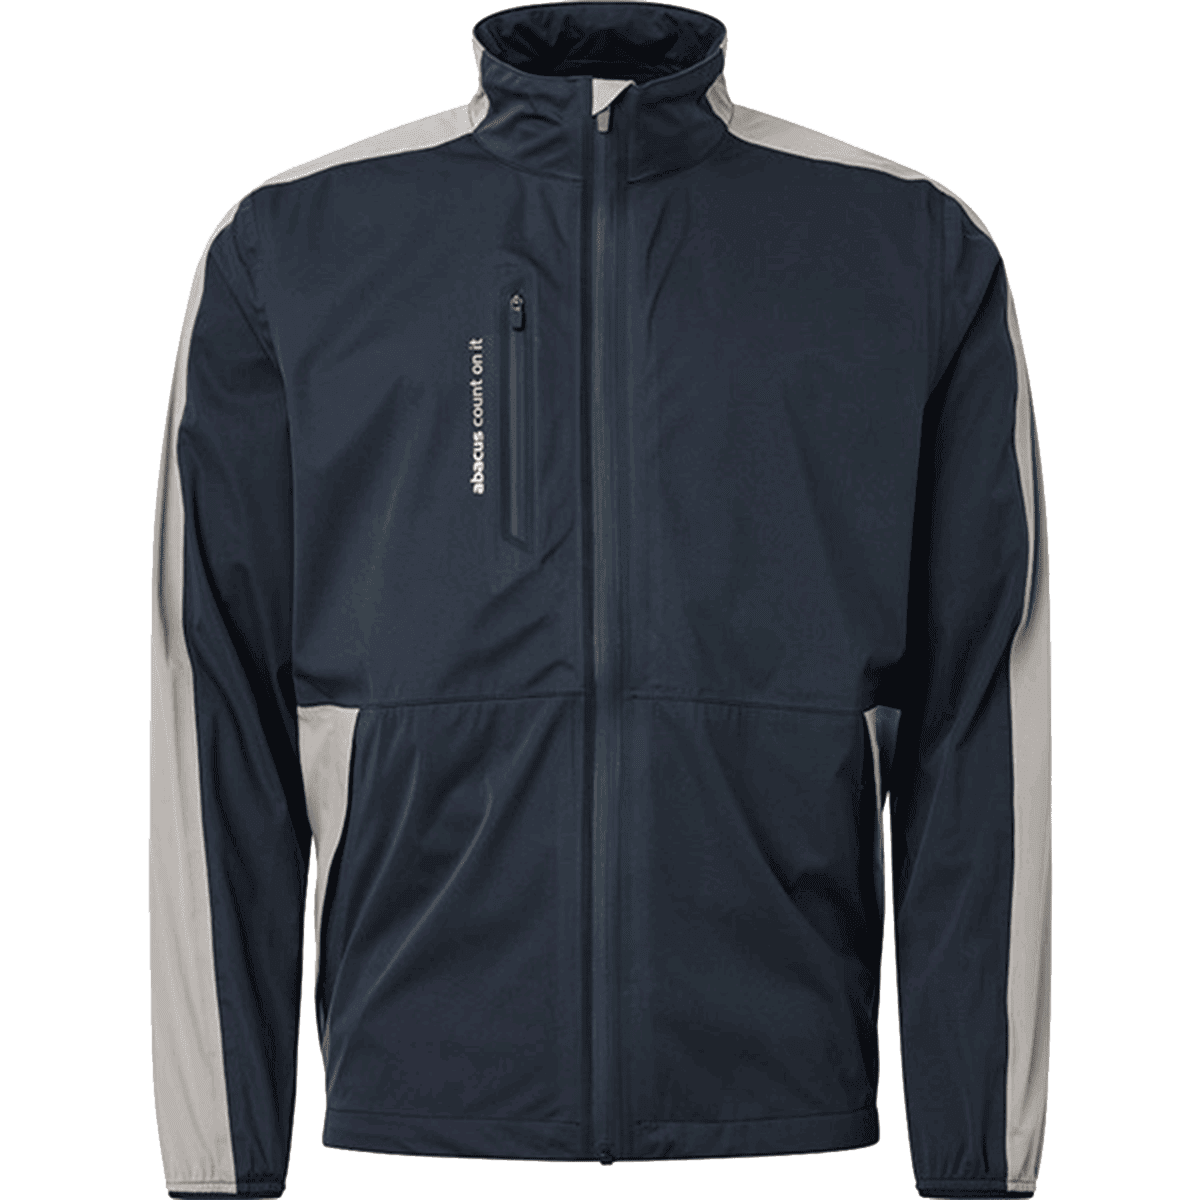 Abacus Bounce rain jacket review